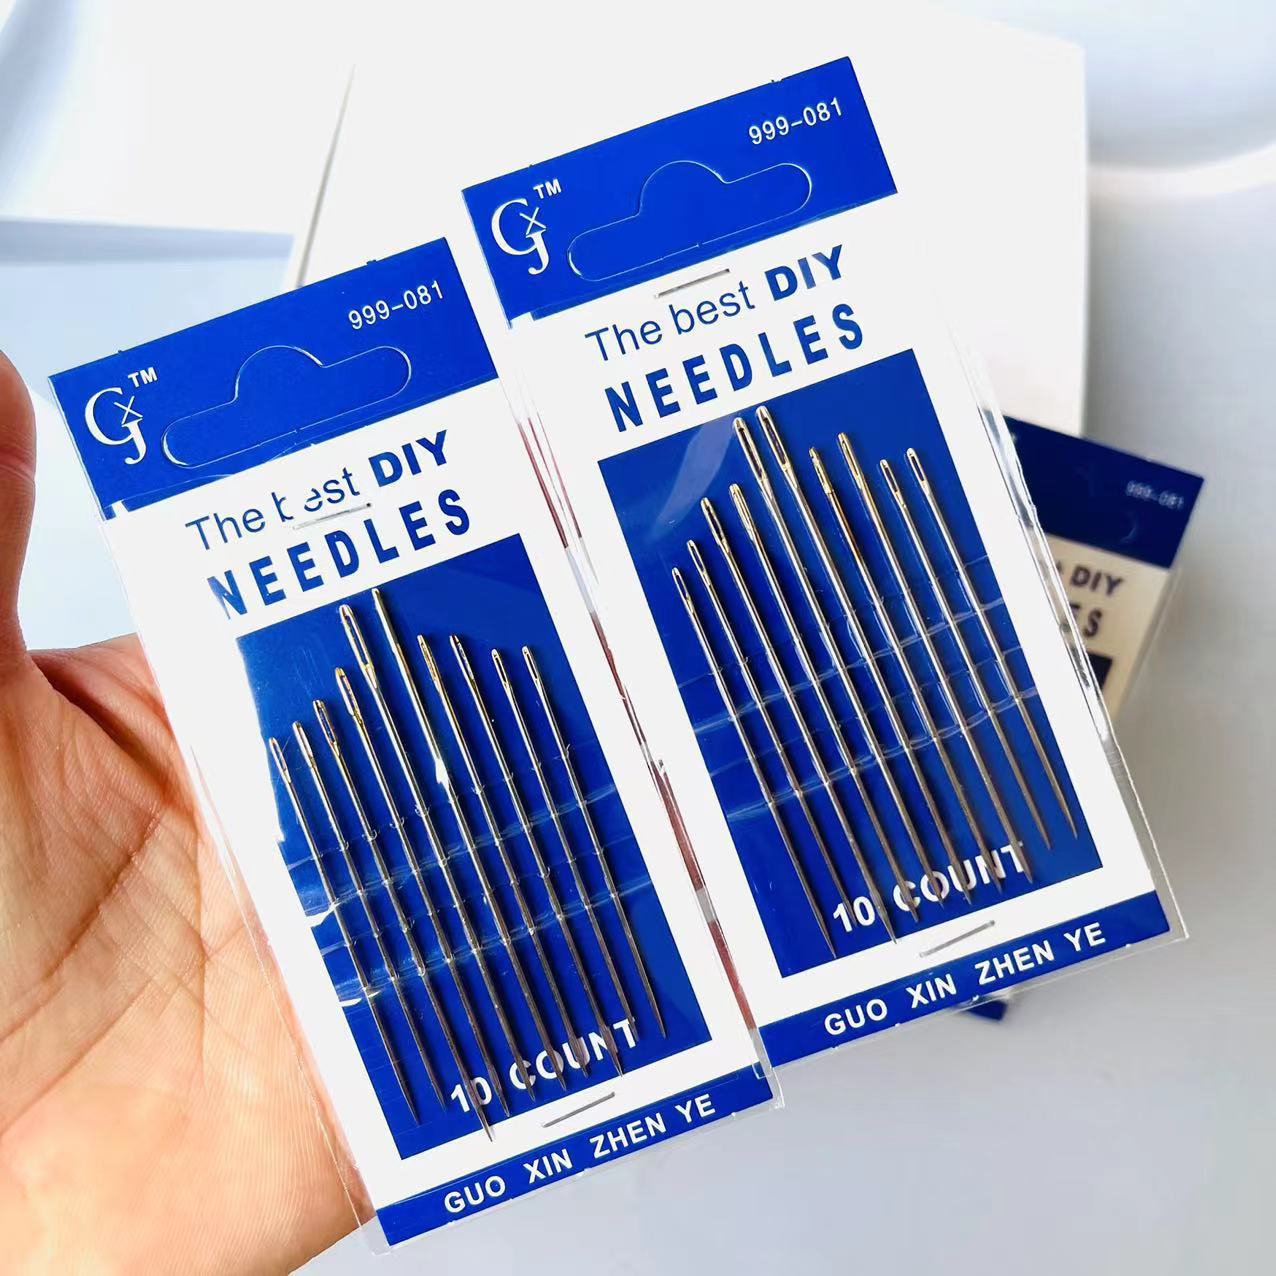 999-081 Blue Board Card Acupuncture Embroidery Worker Sewing Needle Household Sewing Needle Sweater Sewing Needle Sewing Quilt